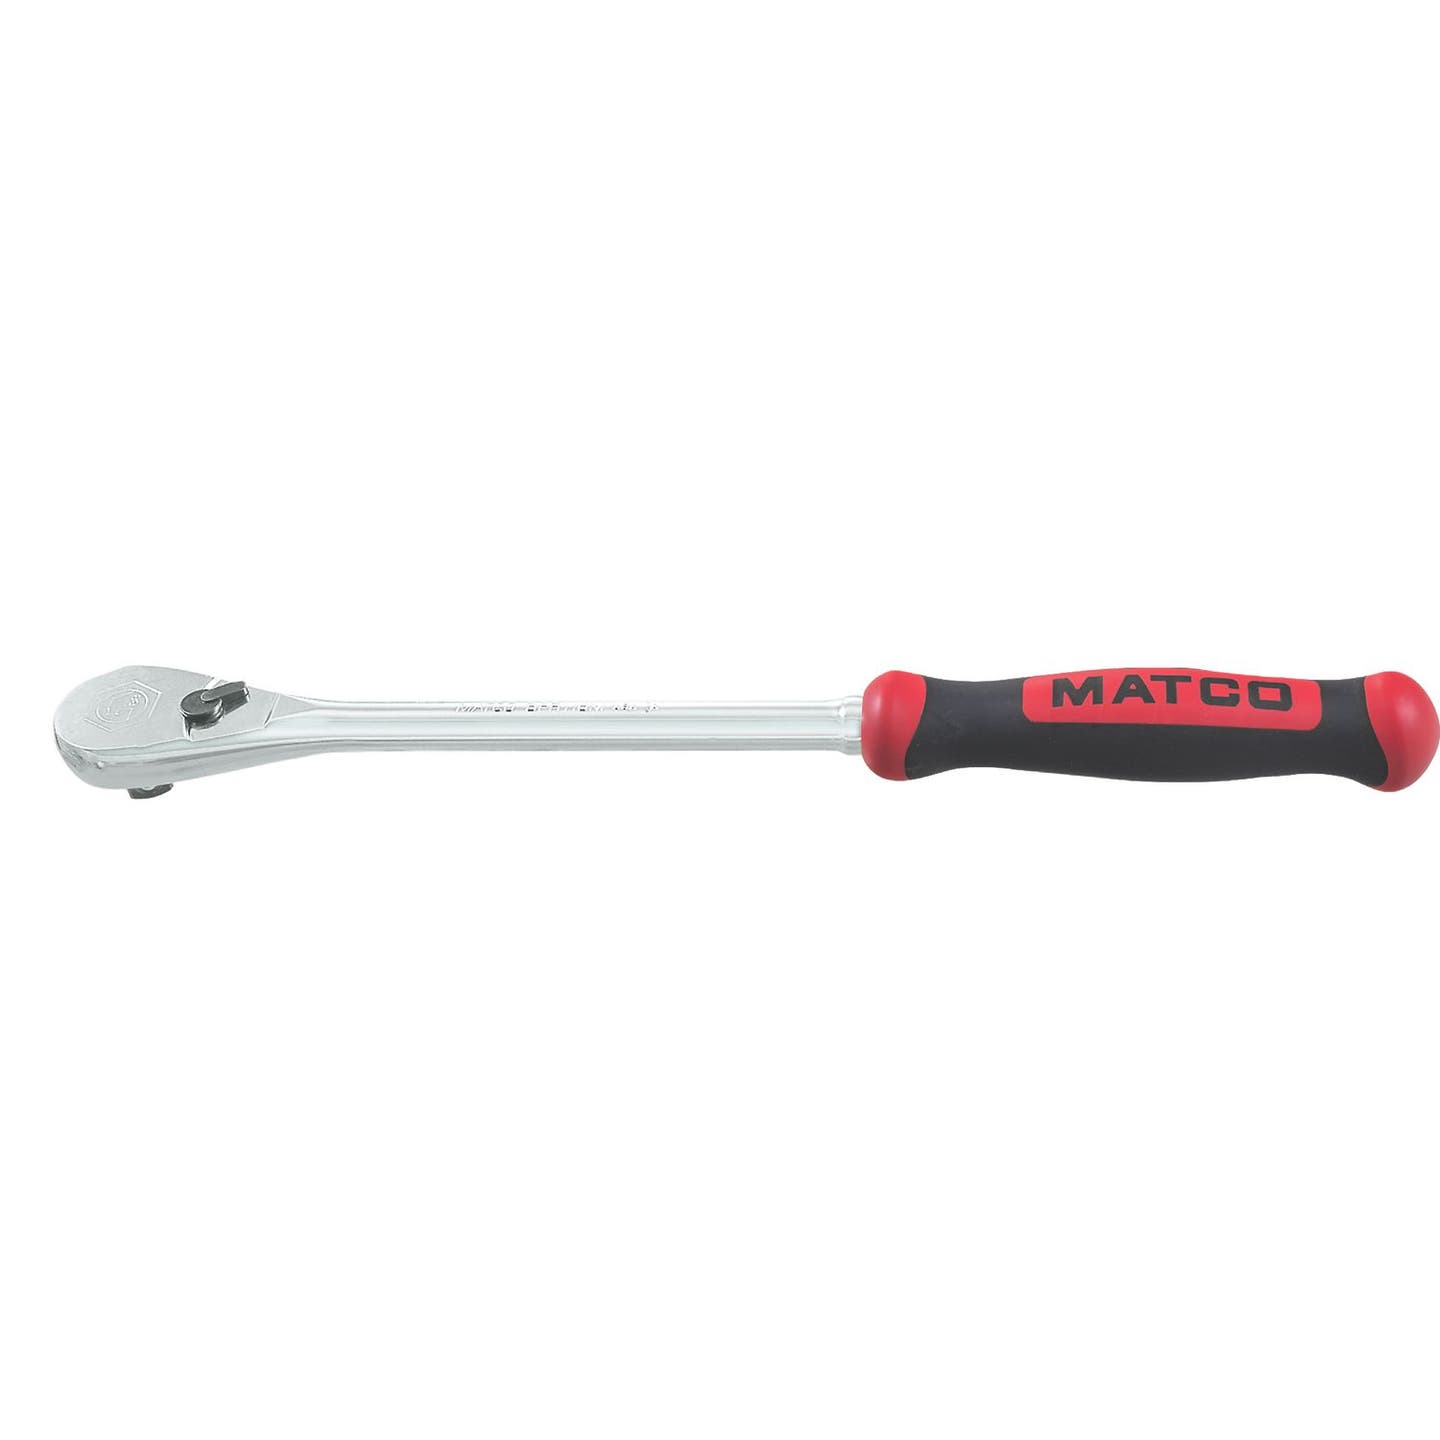 3/8" DRIVE 11-3/4" EIGHTY8 TOOTH FIXED RATCHET WITH ERGO HANDLE - RED